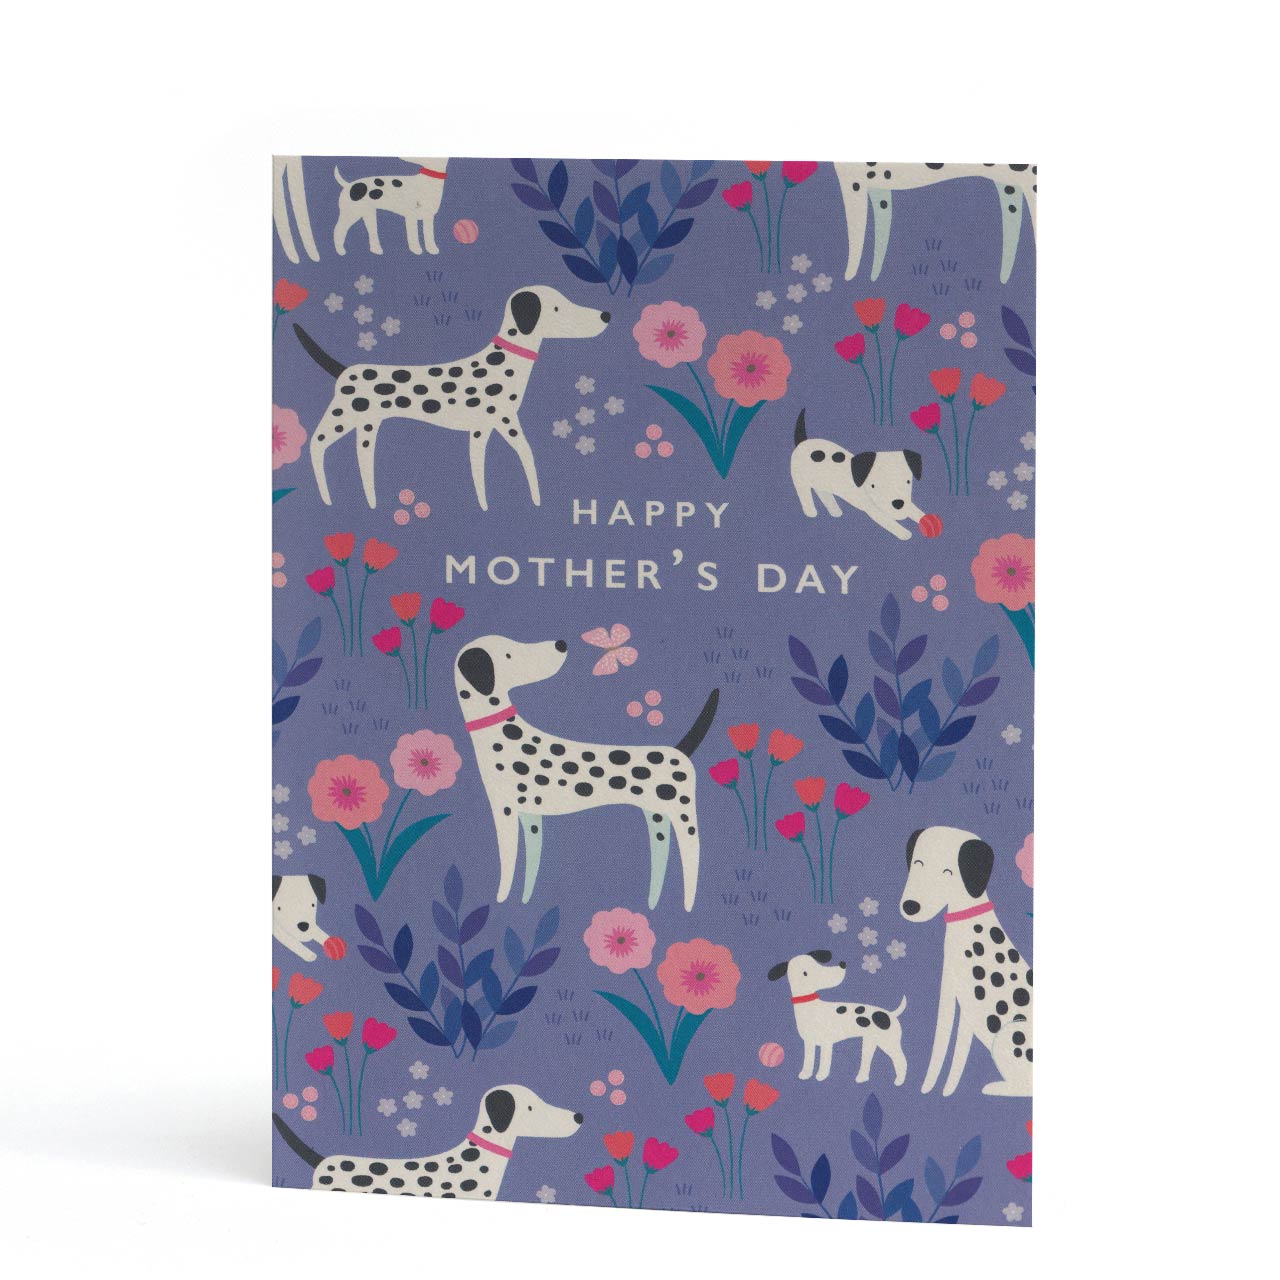 Mother's Day Dalmatians Greeting Card